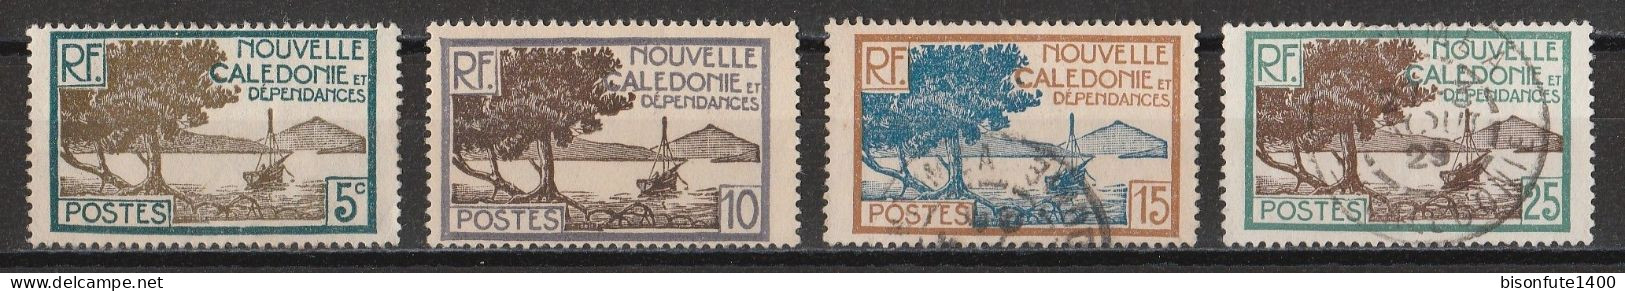 Nouvelle-Calédonie 1910 à 1939 : Timbres Yvert & Tellier N° 88 - 90 - 139 - 140 - 141 - 142 - 143 - 144 - 146 - 150 Et.. - Used Stamps